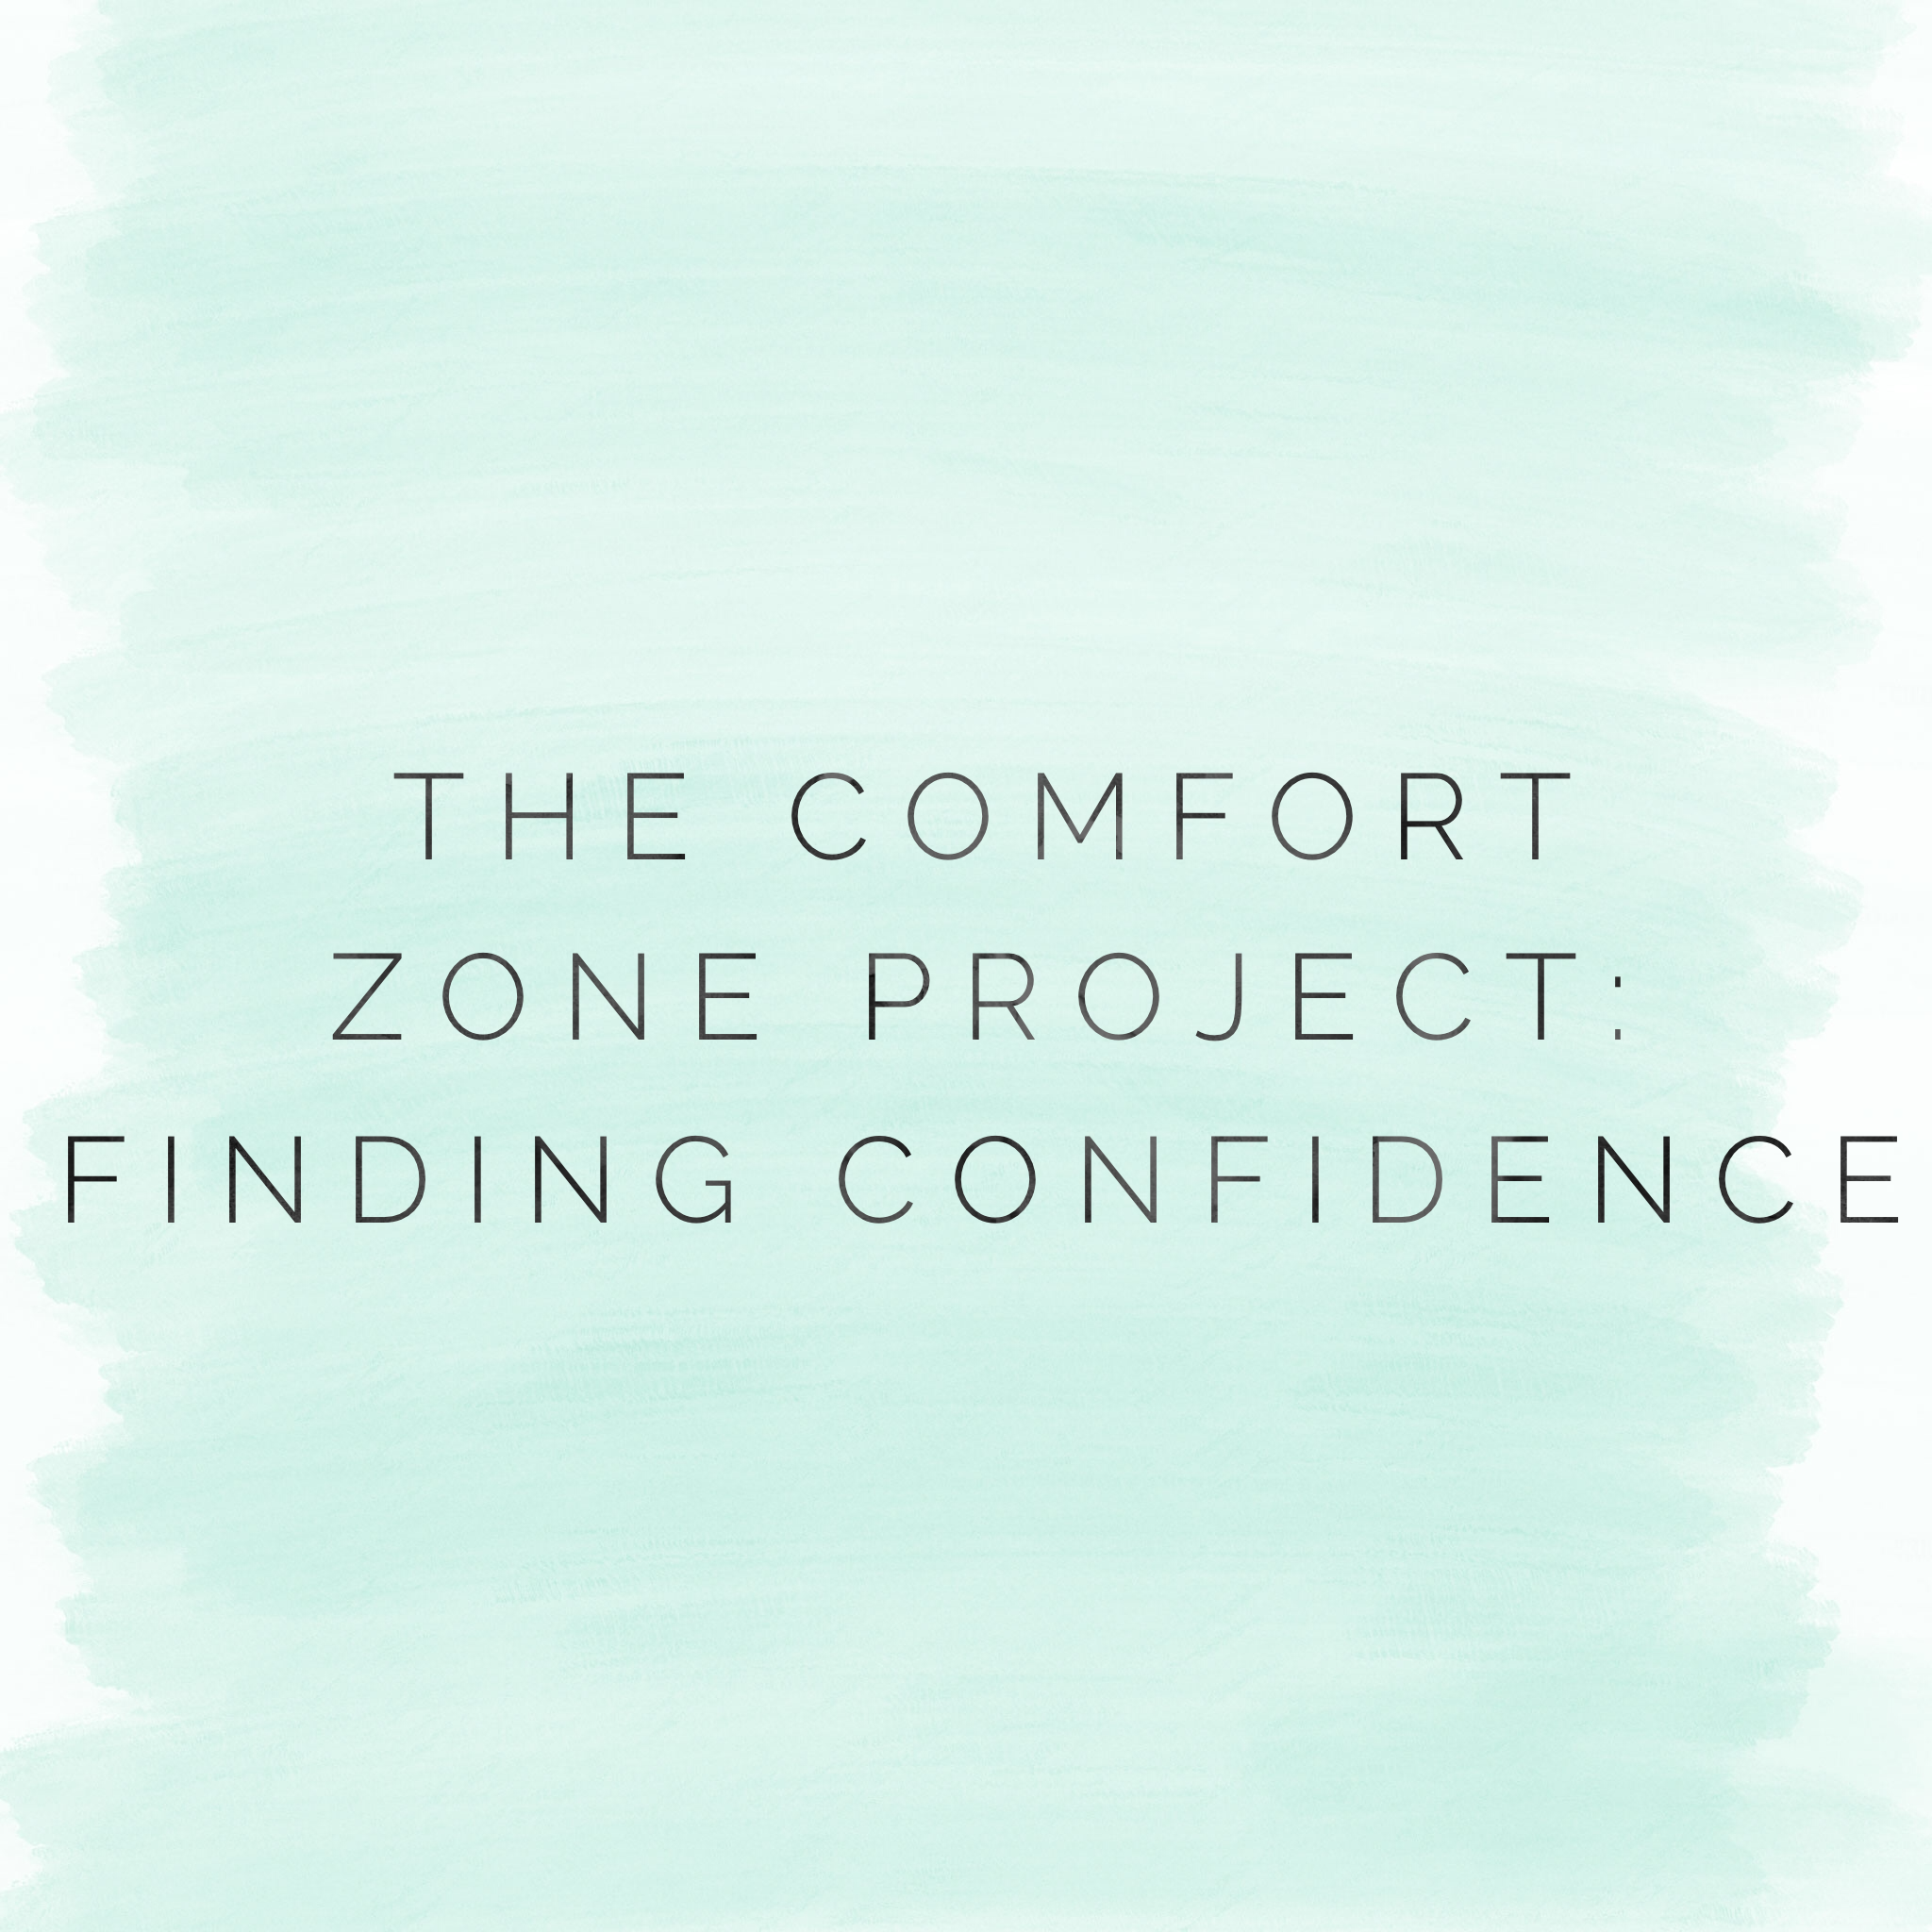 The Comfort Zone Project: Finding Confidence